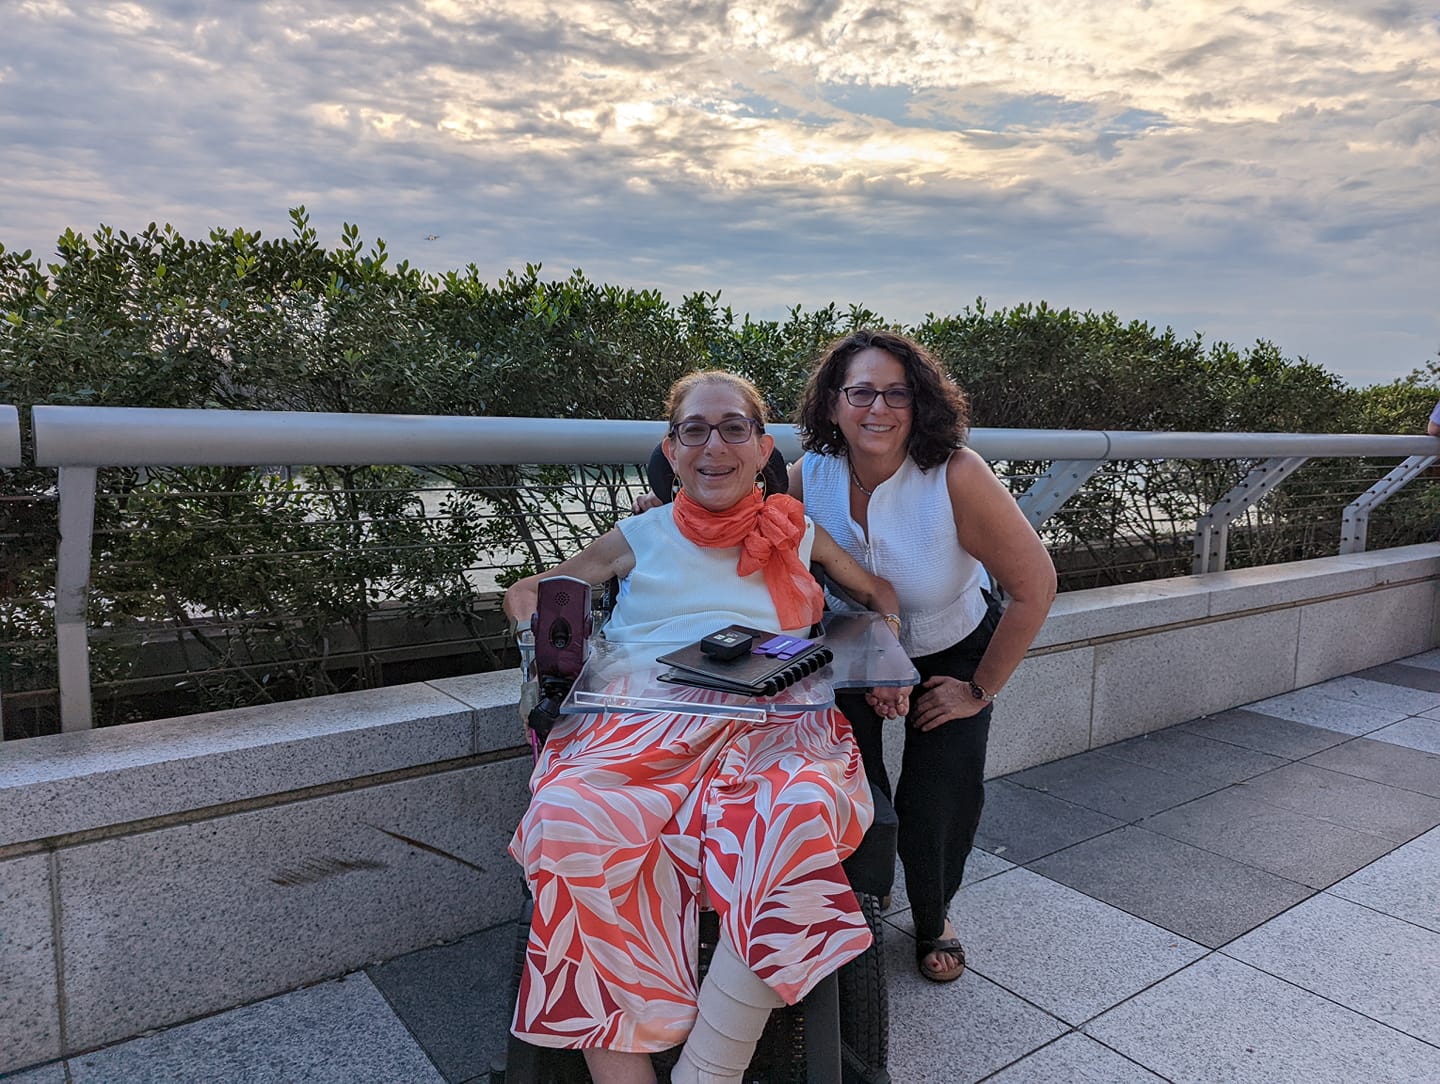 Sheri and her friend at the Kennedy Center to see the Second City, 7-22.